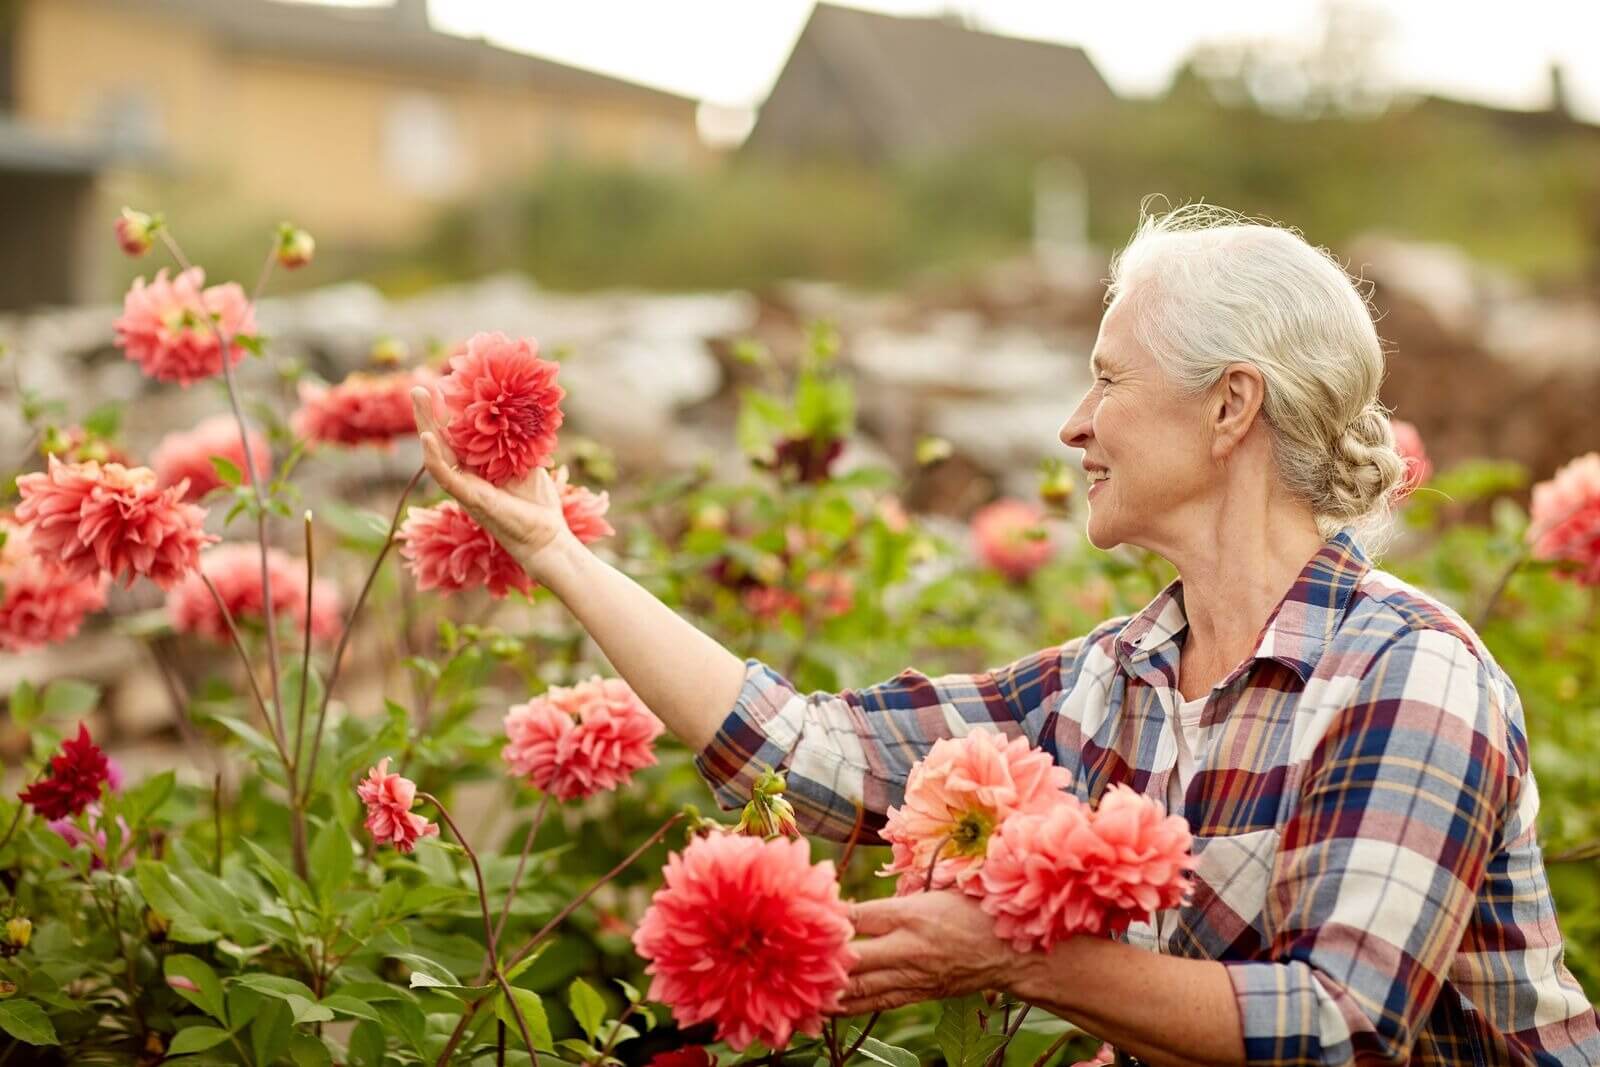 Elder Care Manhattan Beach CA - Gardening and Composting 101: What it is and Why You Should Do It